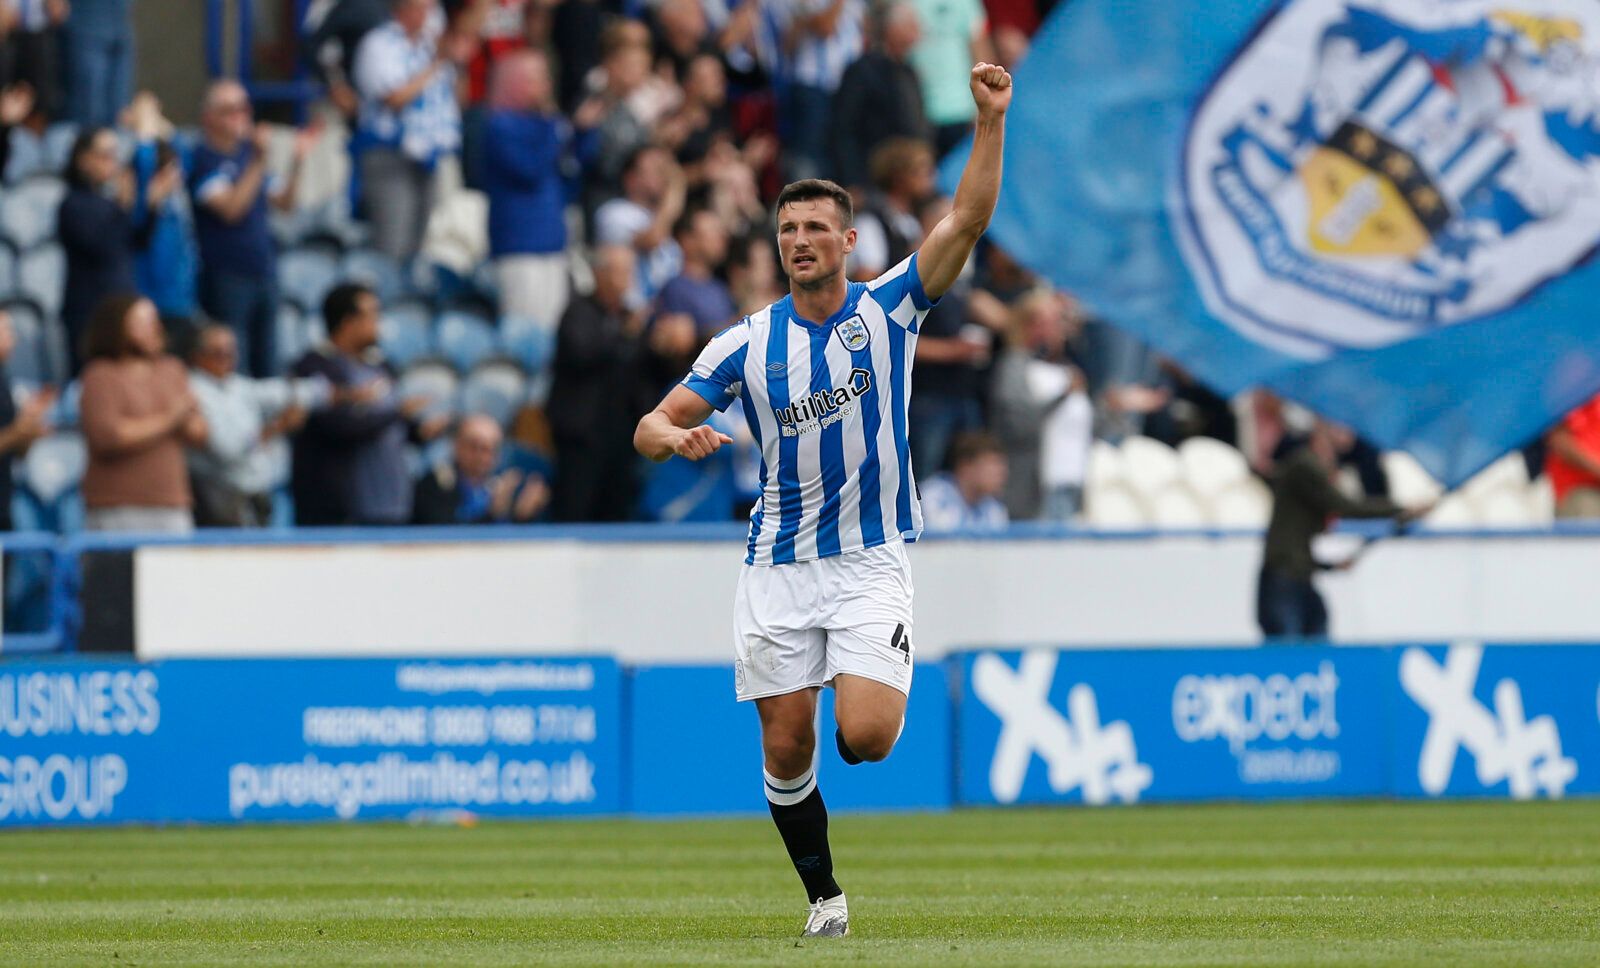 Soccer Football - Championship - Huddersfield Town v Fulham - John Smith's Stadium, Huddersfield, Britain - August 14, 2021 Huddersfield Town's Matty Pearson celebrates scoring their first goal Action Images/Craig Brough EDITORIAL USE ONLY. No use with unauthorized audio, video, data, fixture lists, club/league logos or 'live' services. Online in-match use limited to 75 images, no video emulation. No use in betting, games or single club /league/player publications.  Please contact your account r